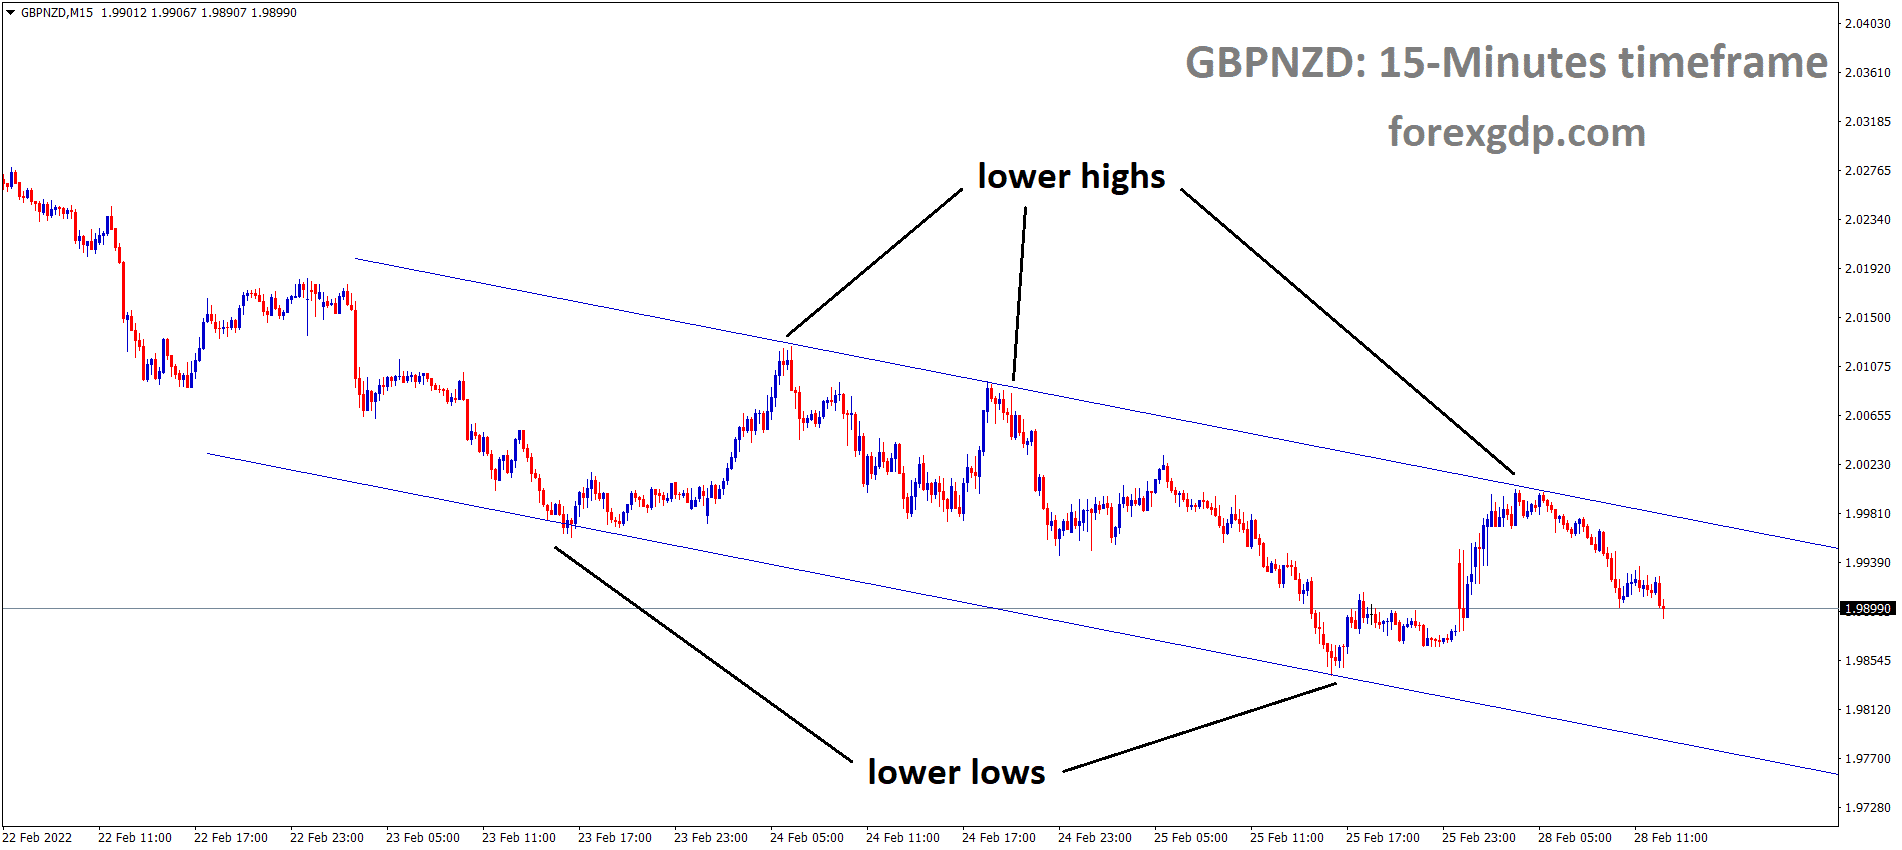 GBPNZD is moving in the Descending channel and the market has fallen from the lower high area of the channel